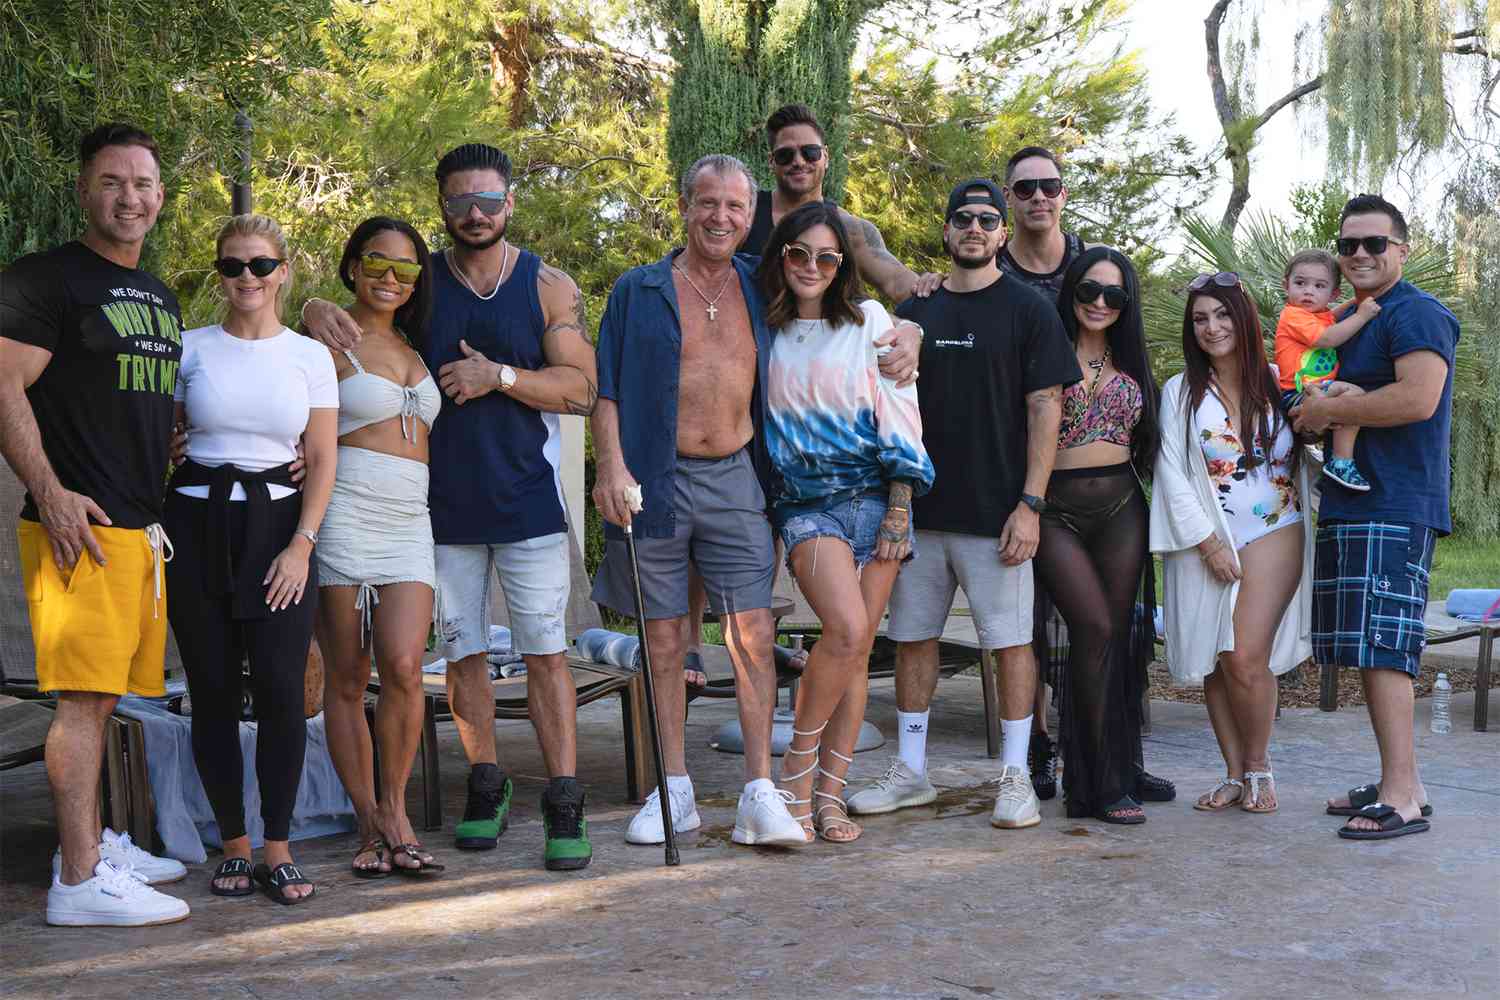 Jersey Shore Family Vacation Season 6 Episode 3 Release Date, Time & Stream Guide